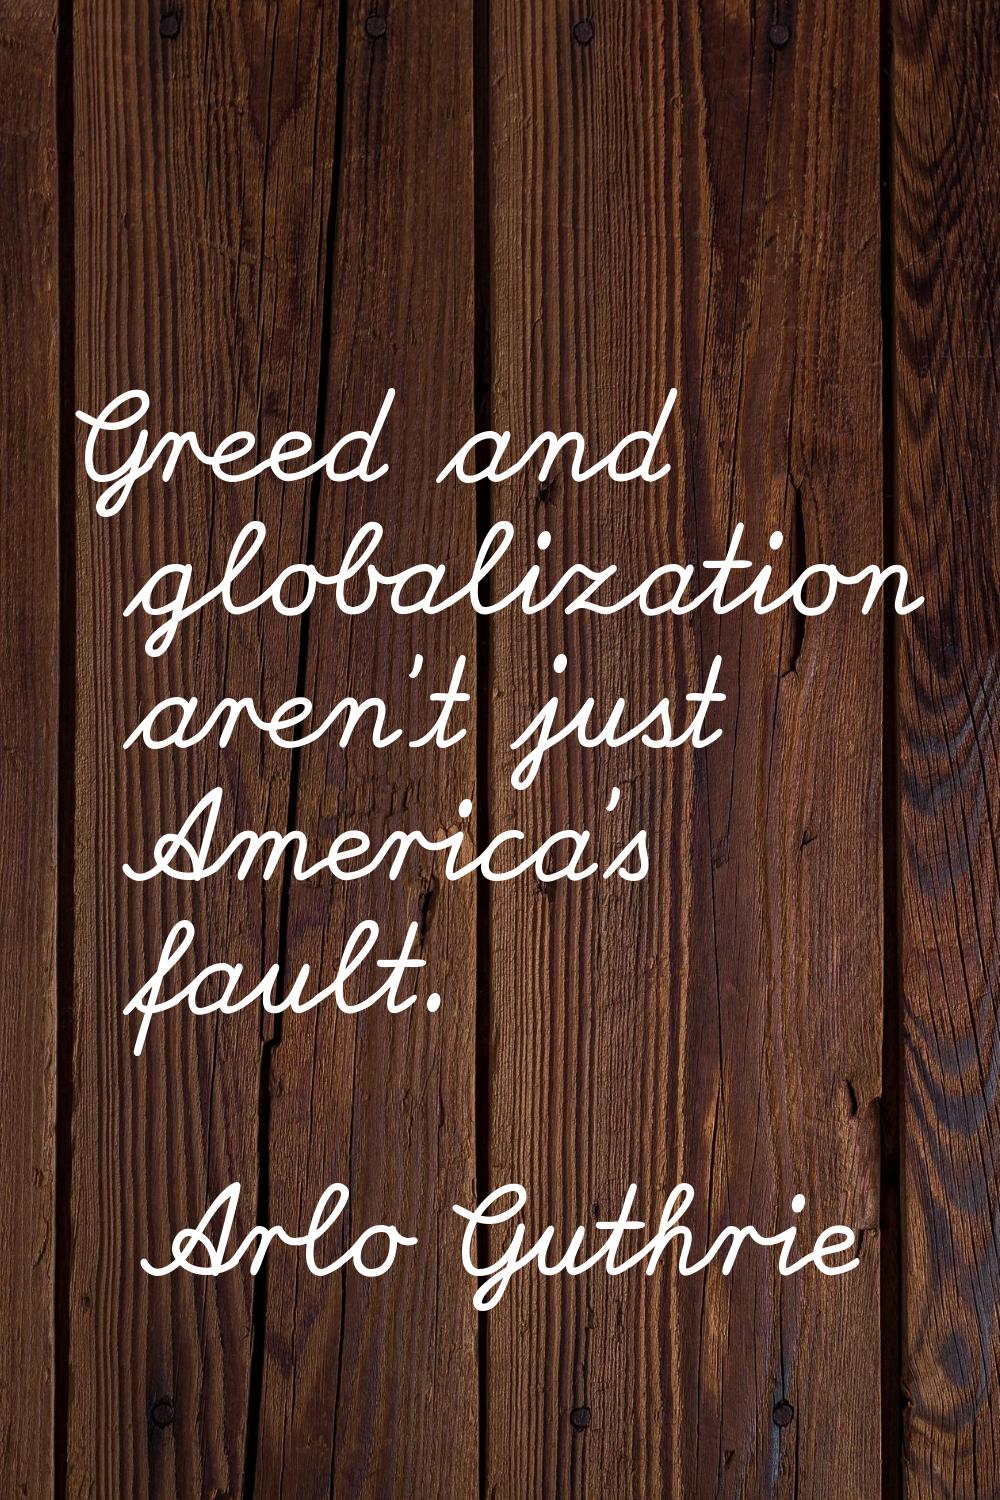 Greed and globalization aren't just America's fault.